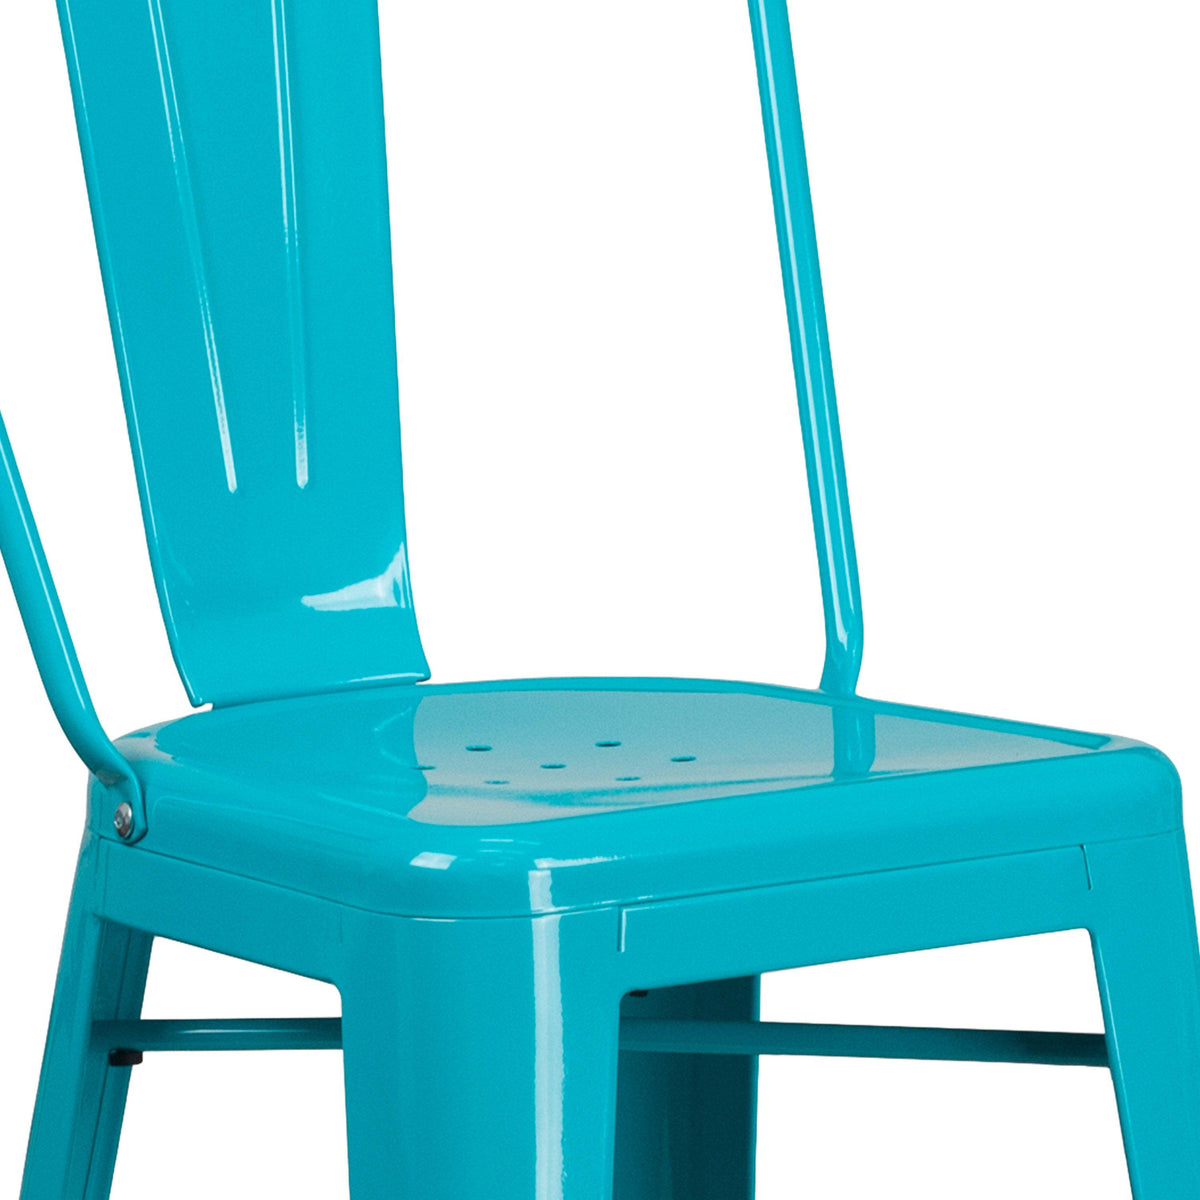 Crystal Teal-Blue |#| 30inch High Crystal Teal-Blue Metal Indoor-Outdoor Barstool with Back